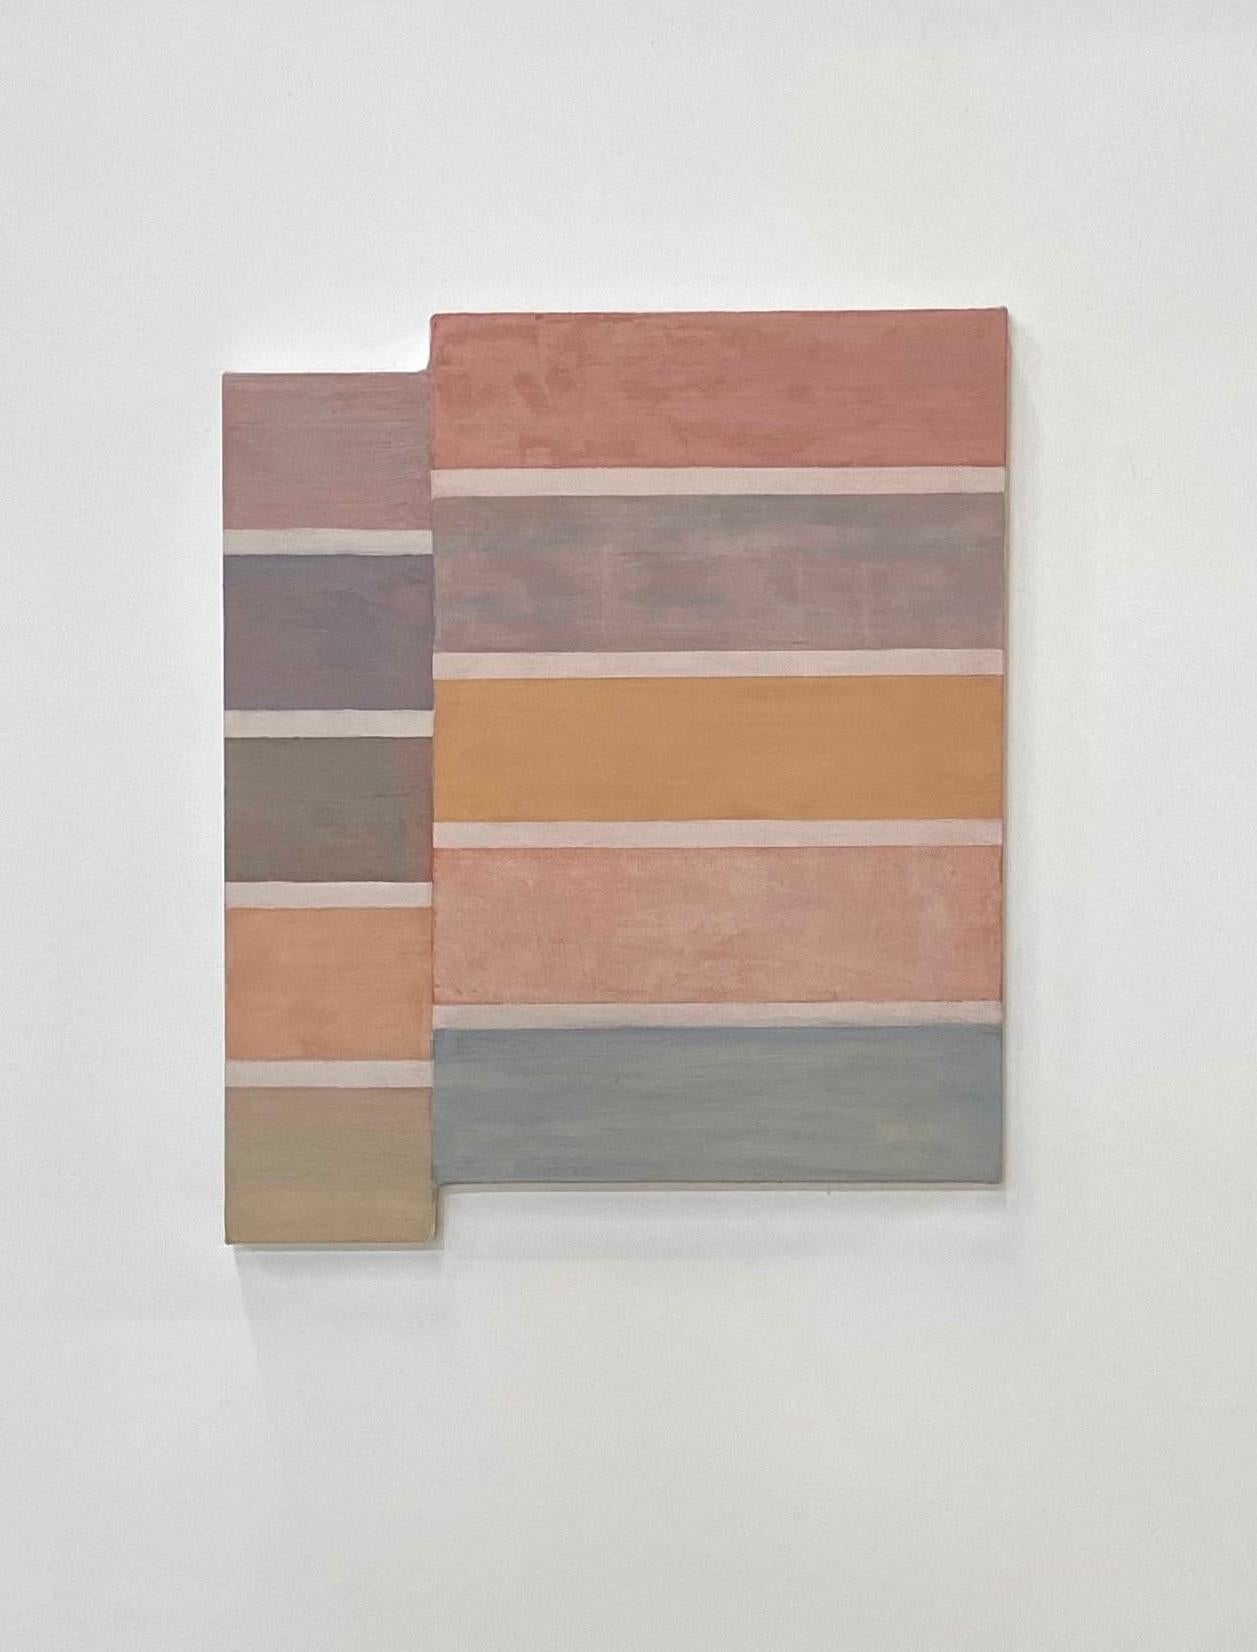 C30, Peach, Mauve, Pink, Dusty Rose Beige Stripes, Pastel Color on Shaped Panel - Painting by Elizabeth Gourlay